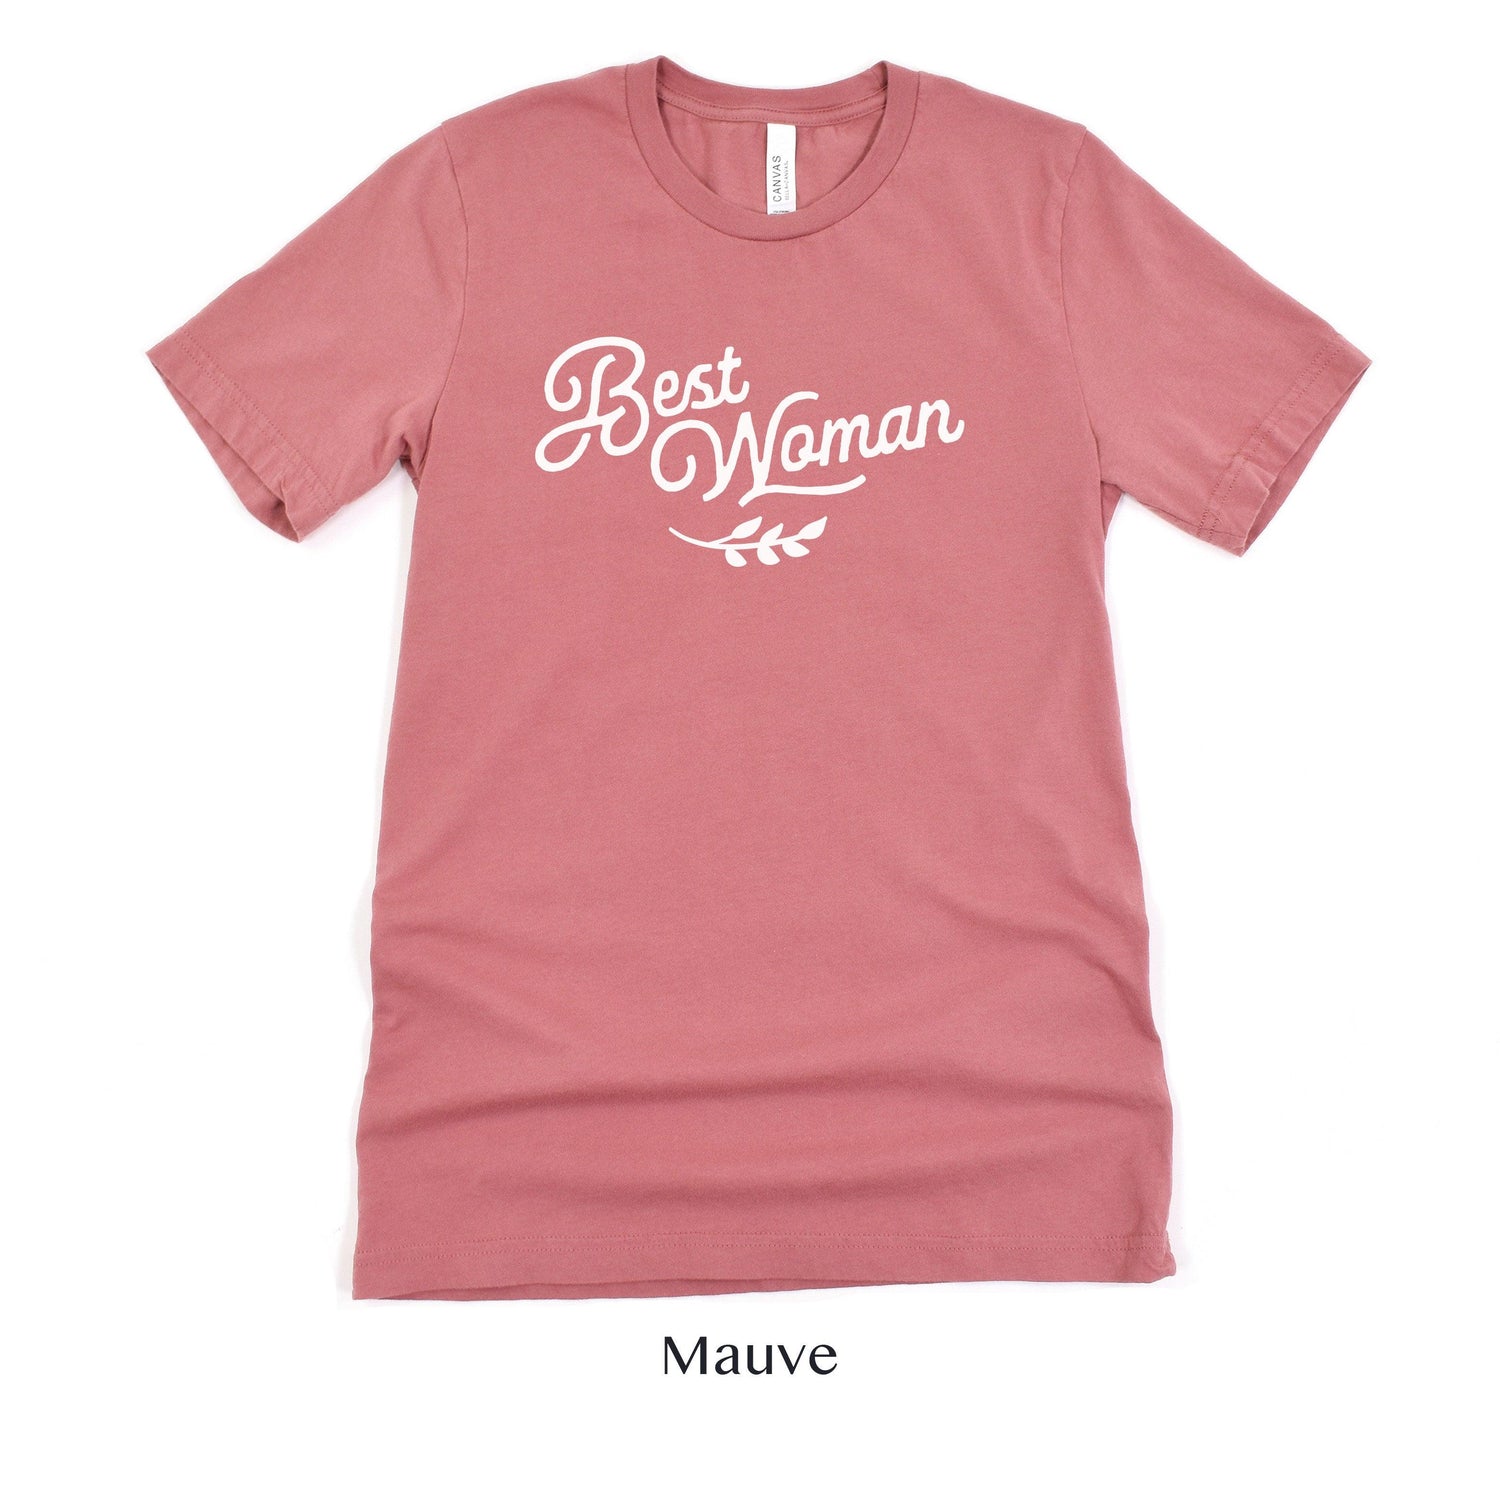 Best Woman Short-Sleeve Tee - Plus Sizes Available by Oaklynn Lane - mauve dusty rose shirt